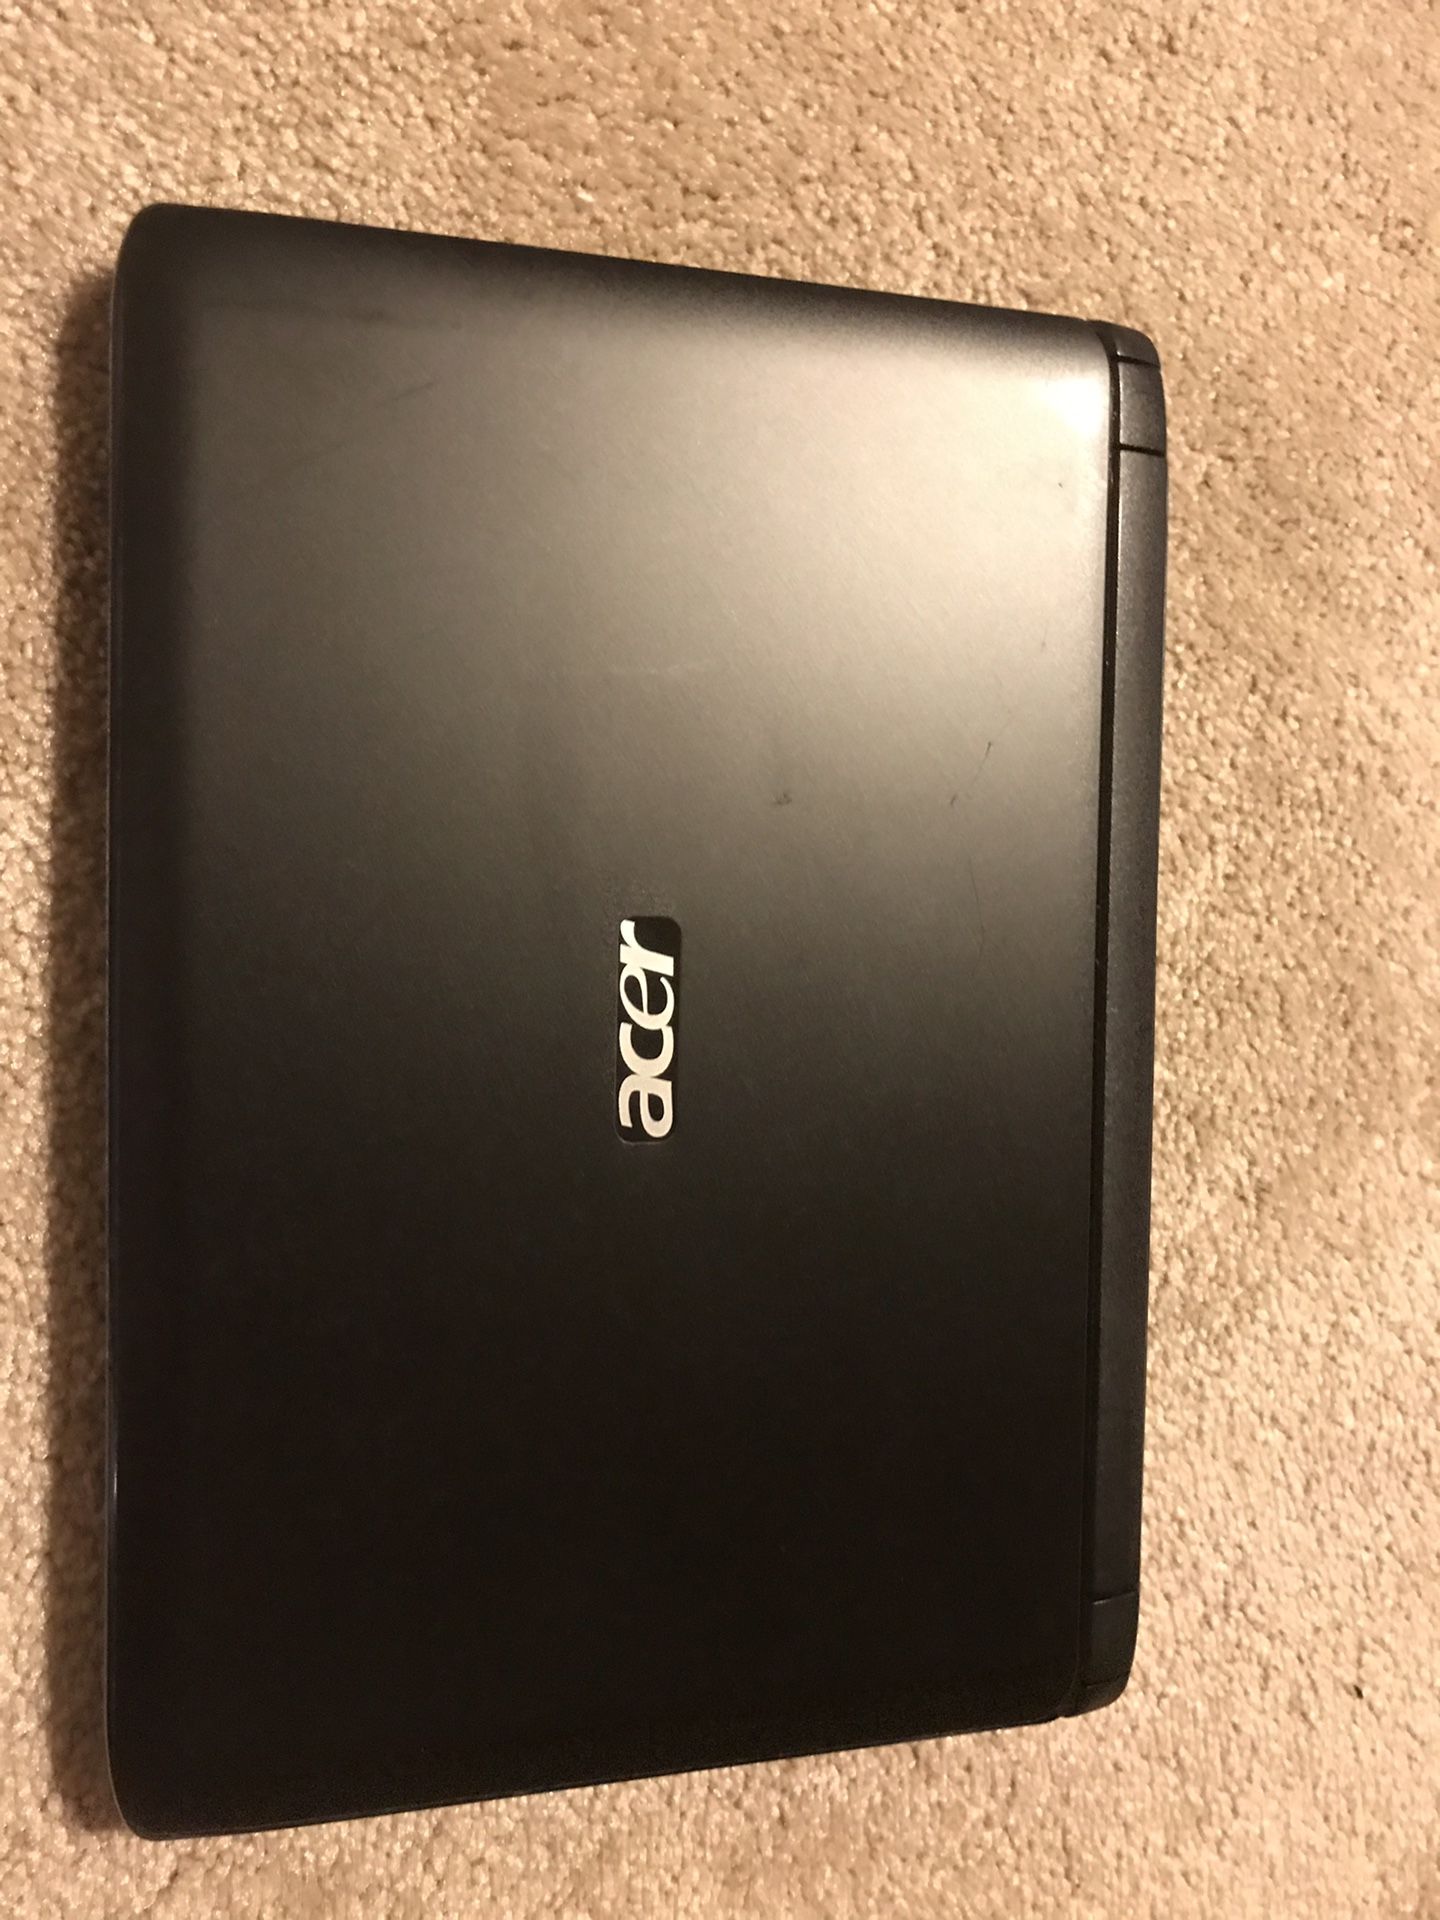 Acer aspire one notebook, set back to factory settings like new includes power-cord charger